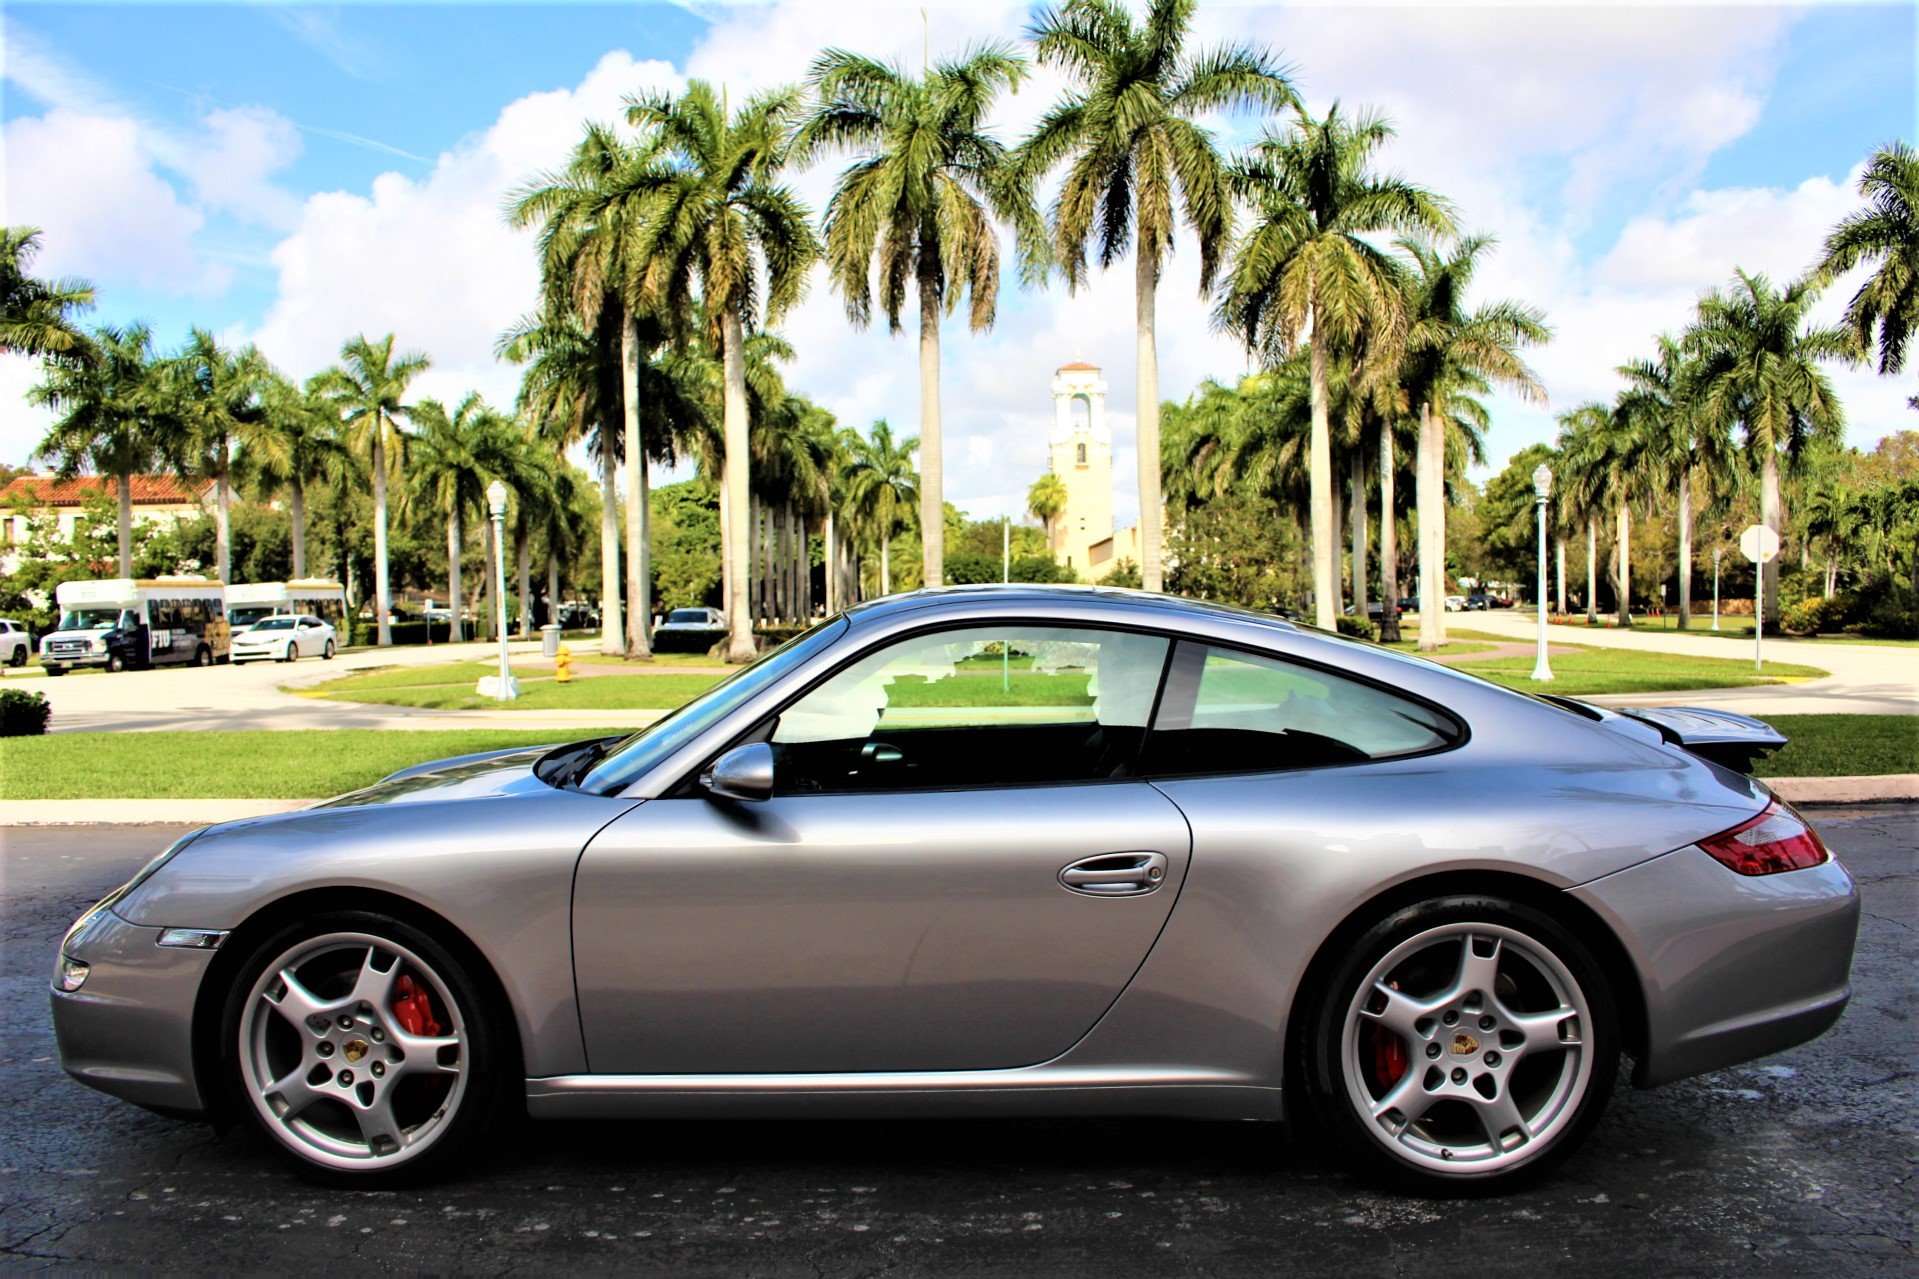 Used 2007 Porsche 911 Carrera S for sale Sold at The Gables Sports Cars in Miami FL 33146 2